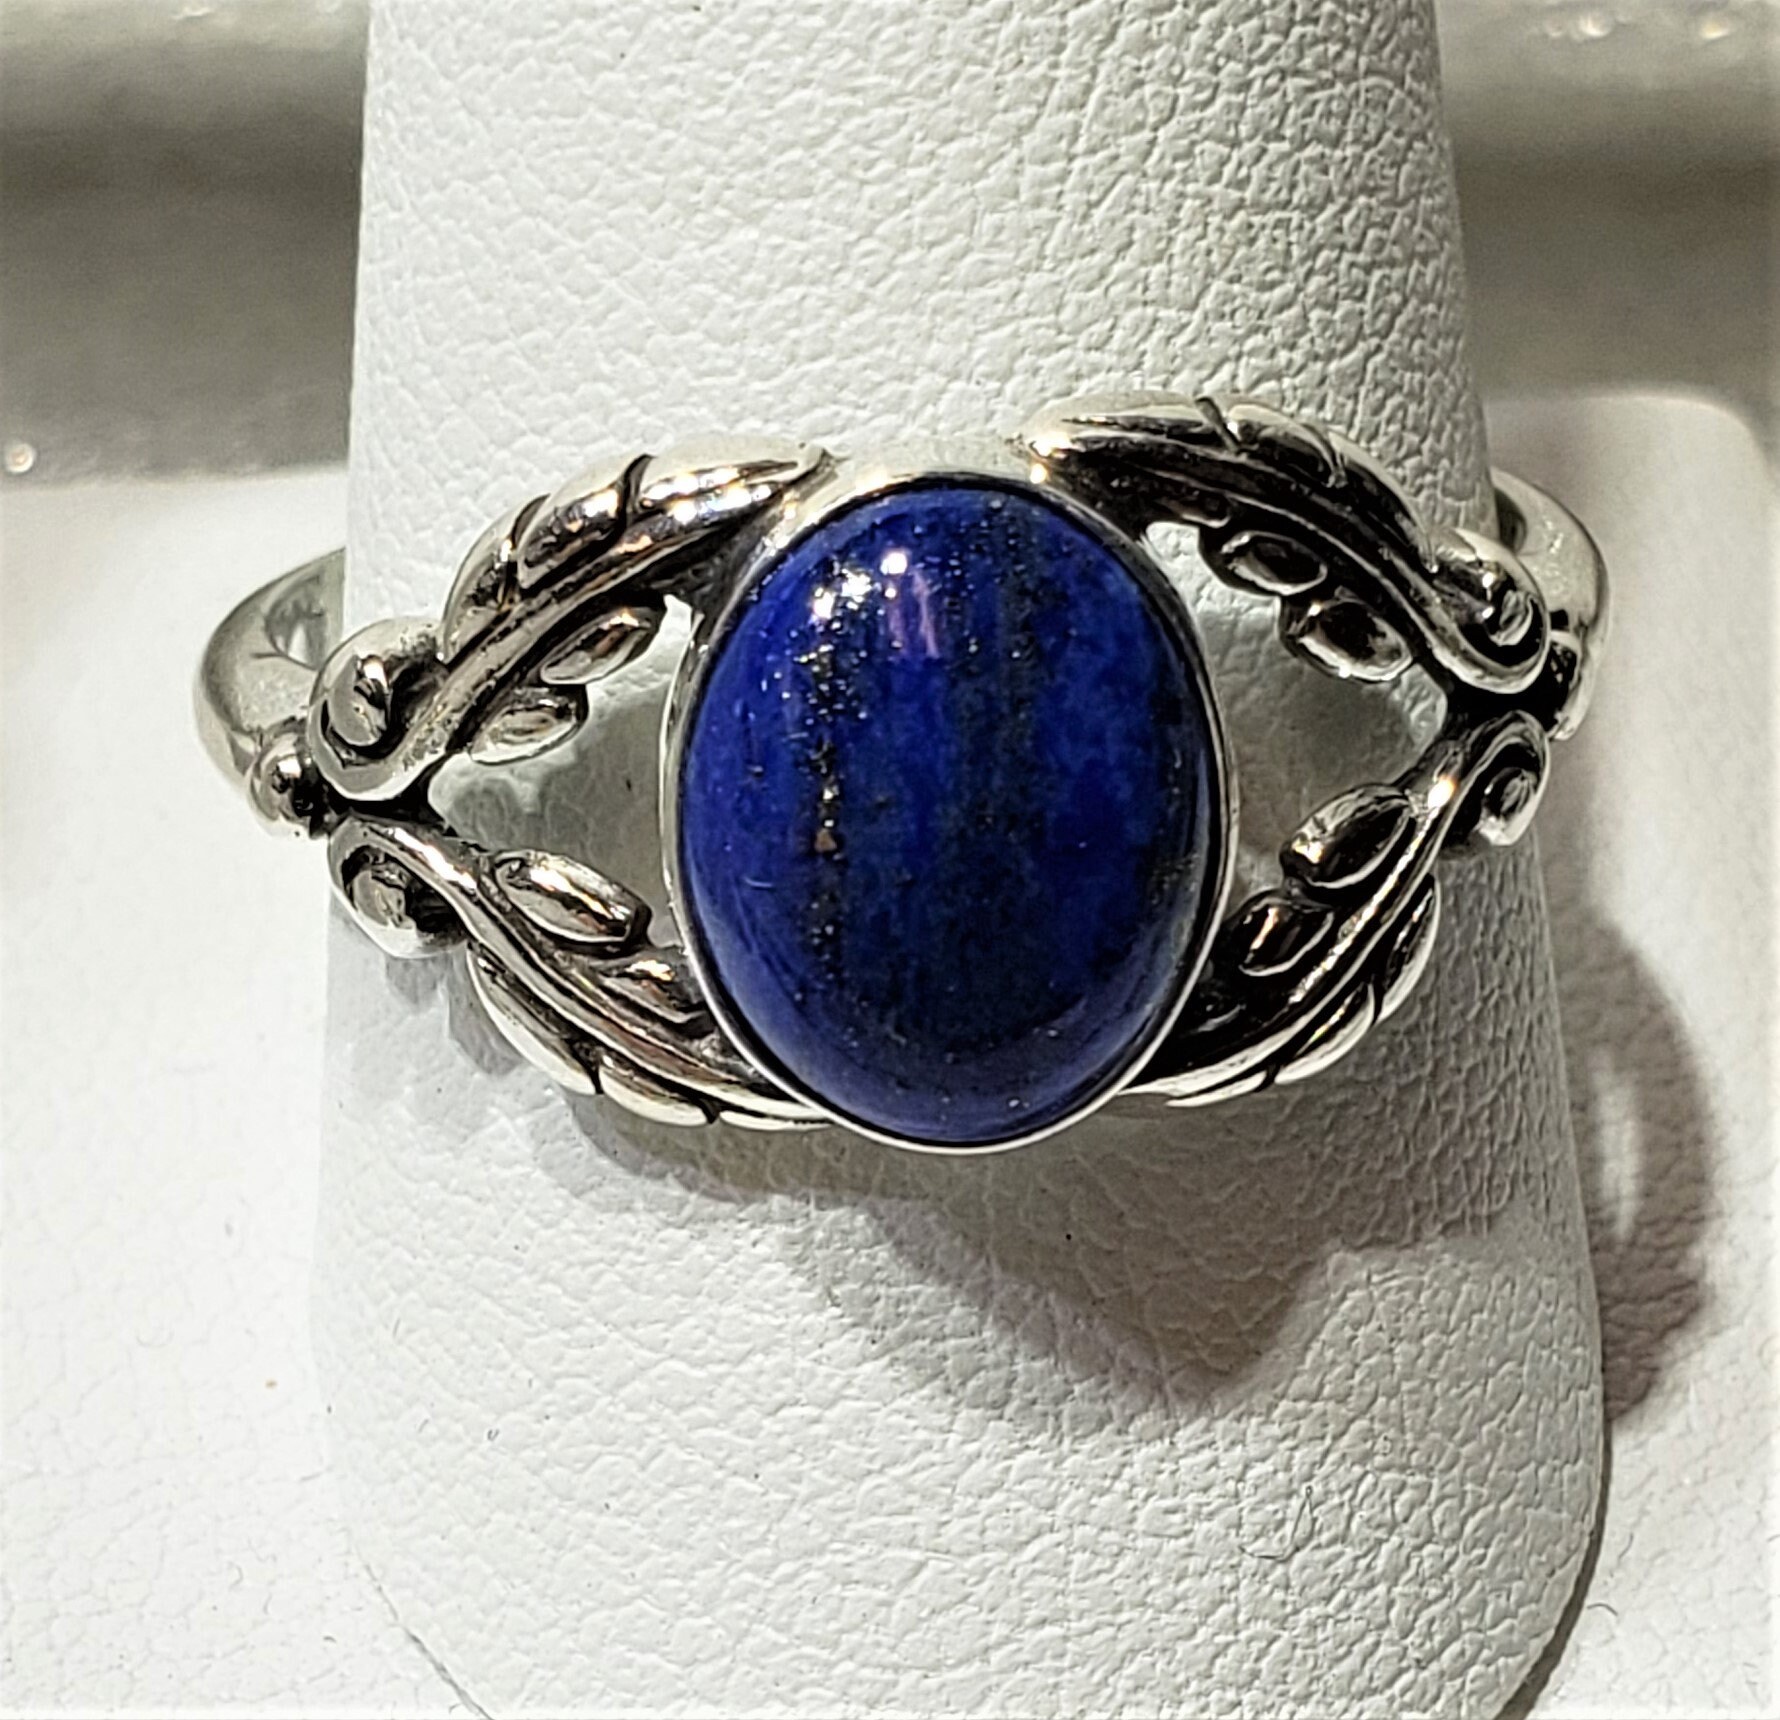 Genuine Lapis Lazuli Set in Solid Silver 925 Mark Ring Sizes 4 - Etsy